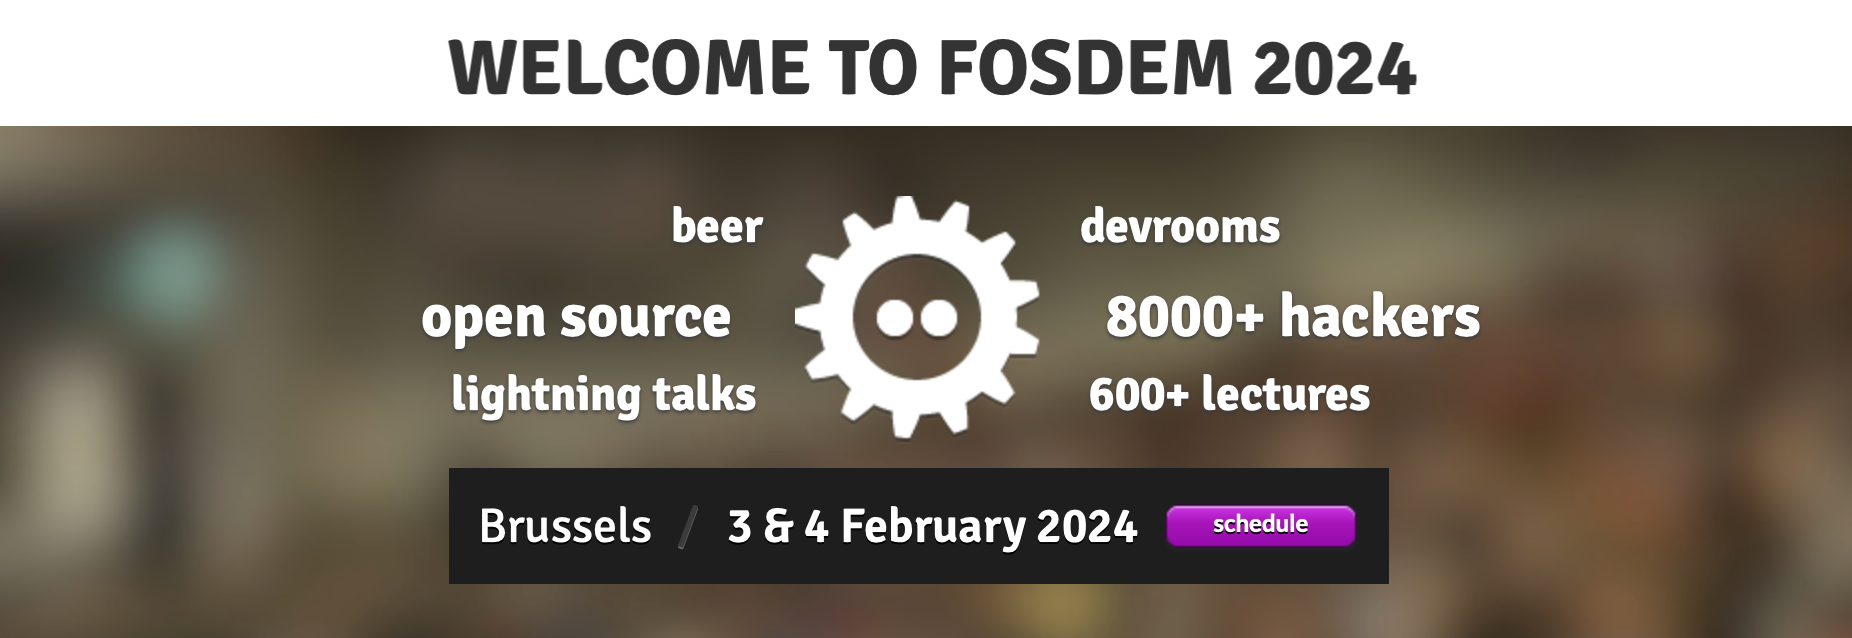 draw.io is sponsoring the FOSDEM'24 conference for open source developers